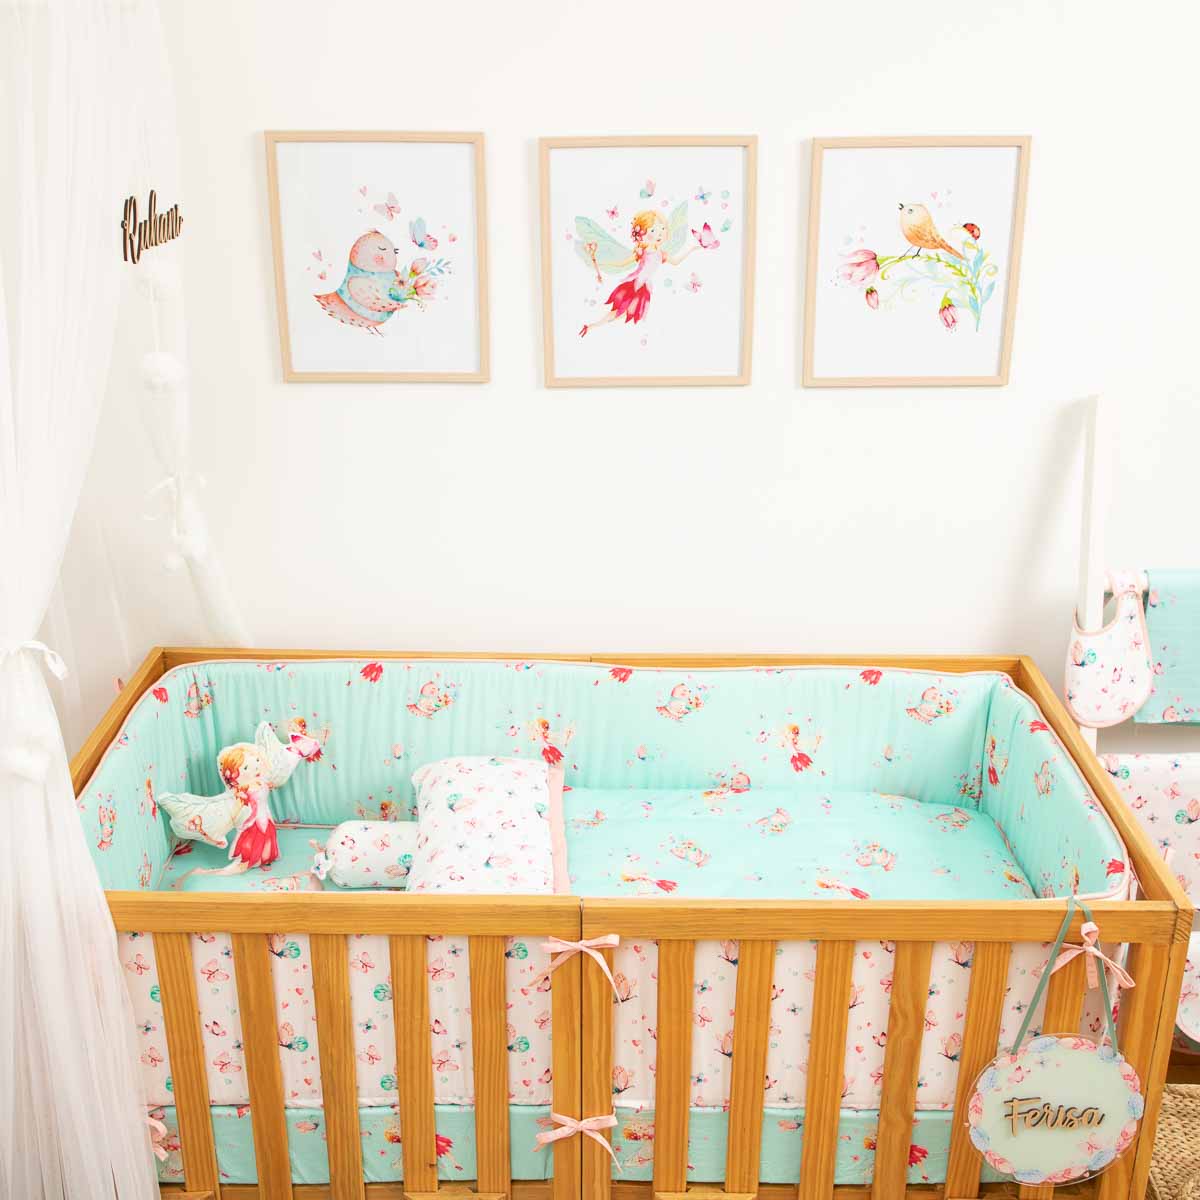 Fiora the Fairy - Cot Bedding Set with Bumper